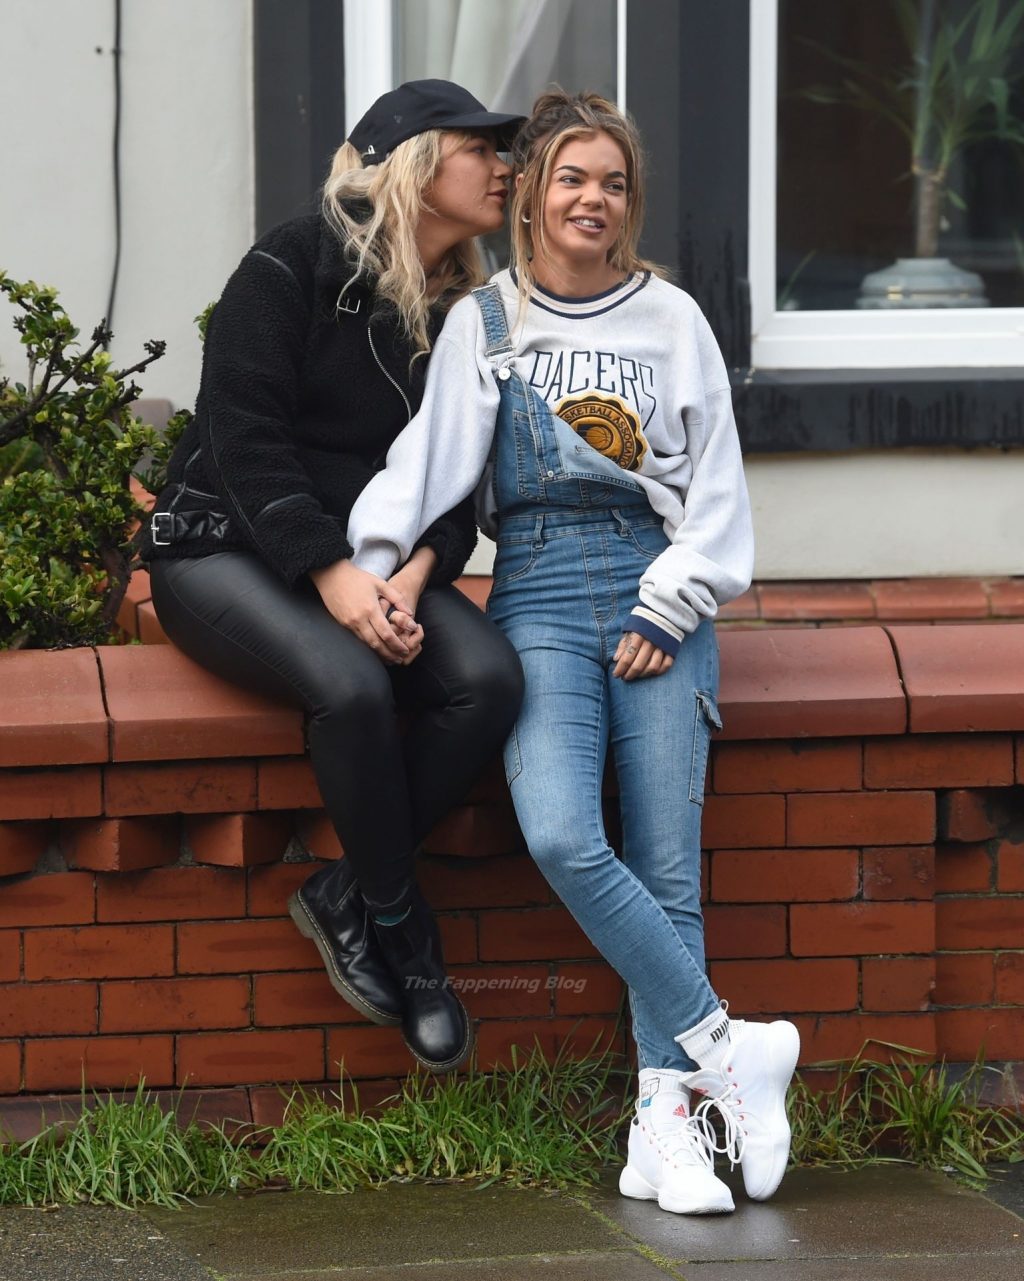 Lesbians Sarah Hutchinson &amp; Charlotte Taundry are Seen Kissing in Blackpool (31 Photos)